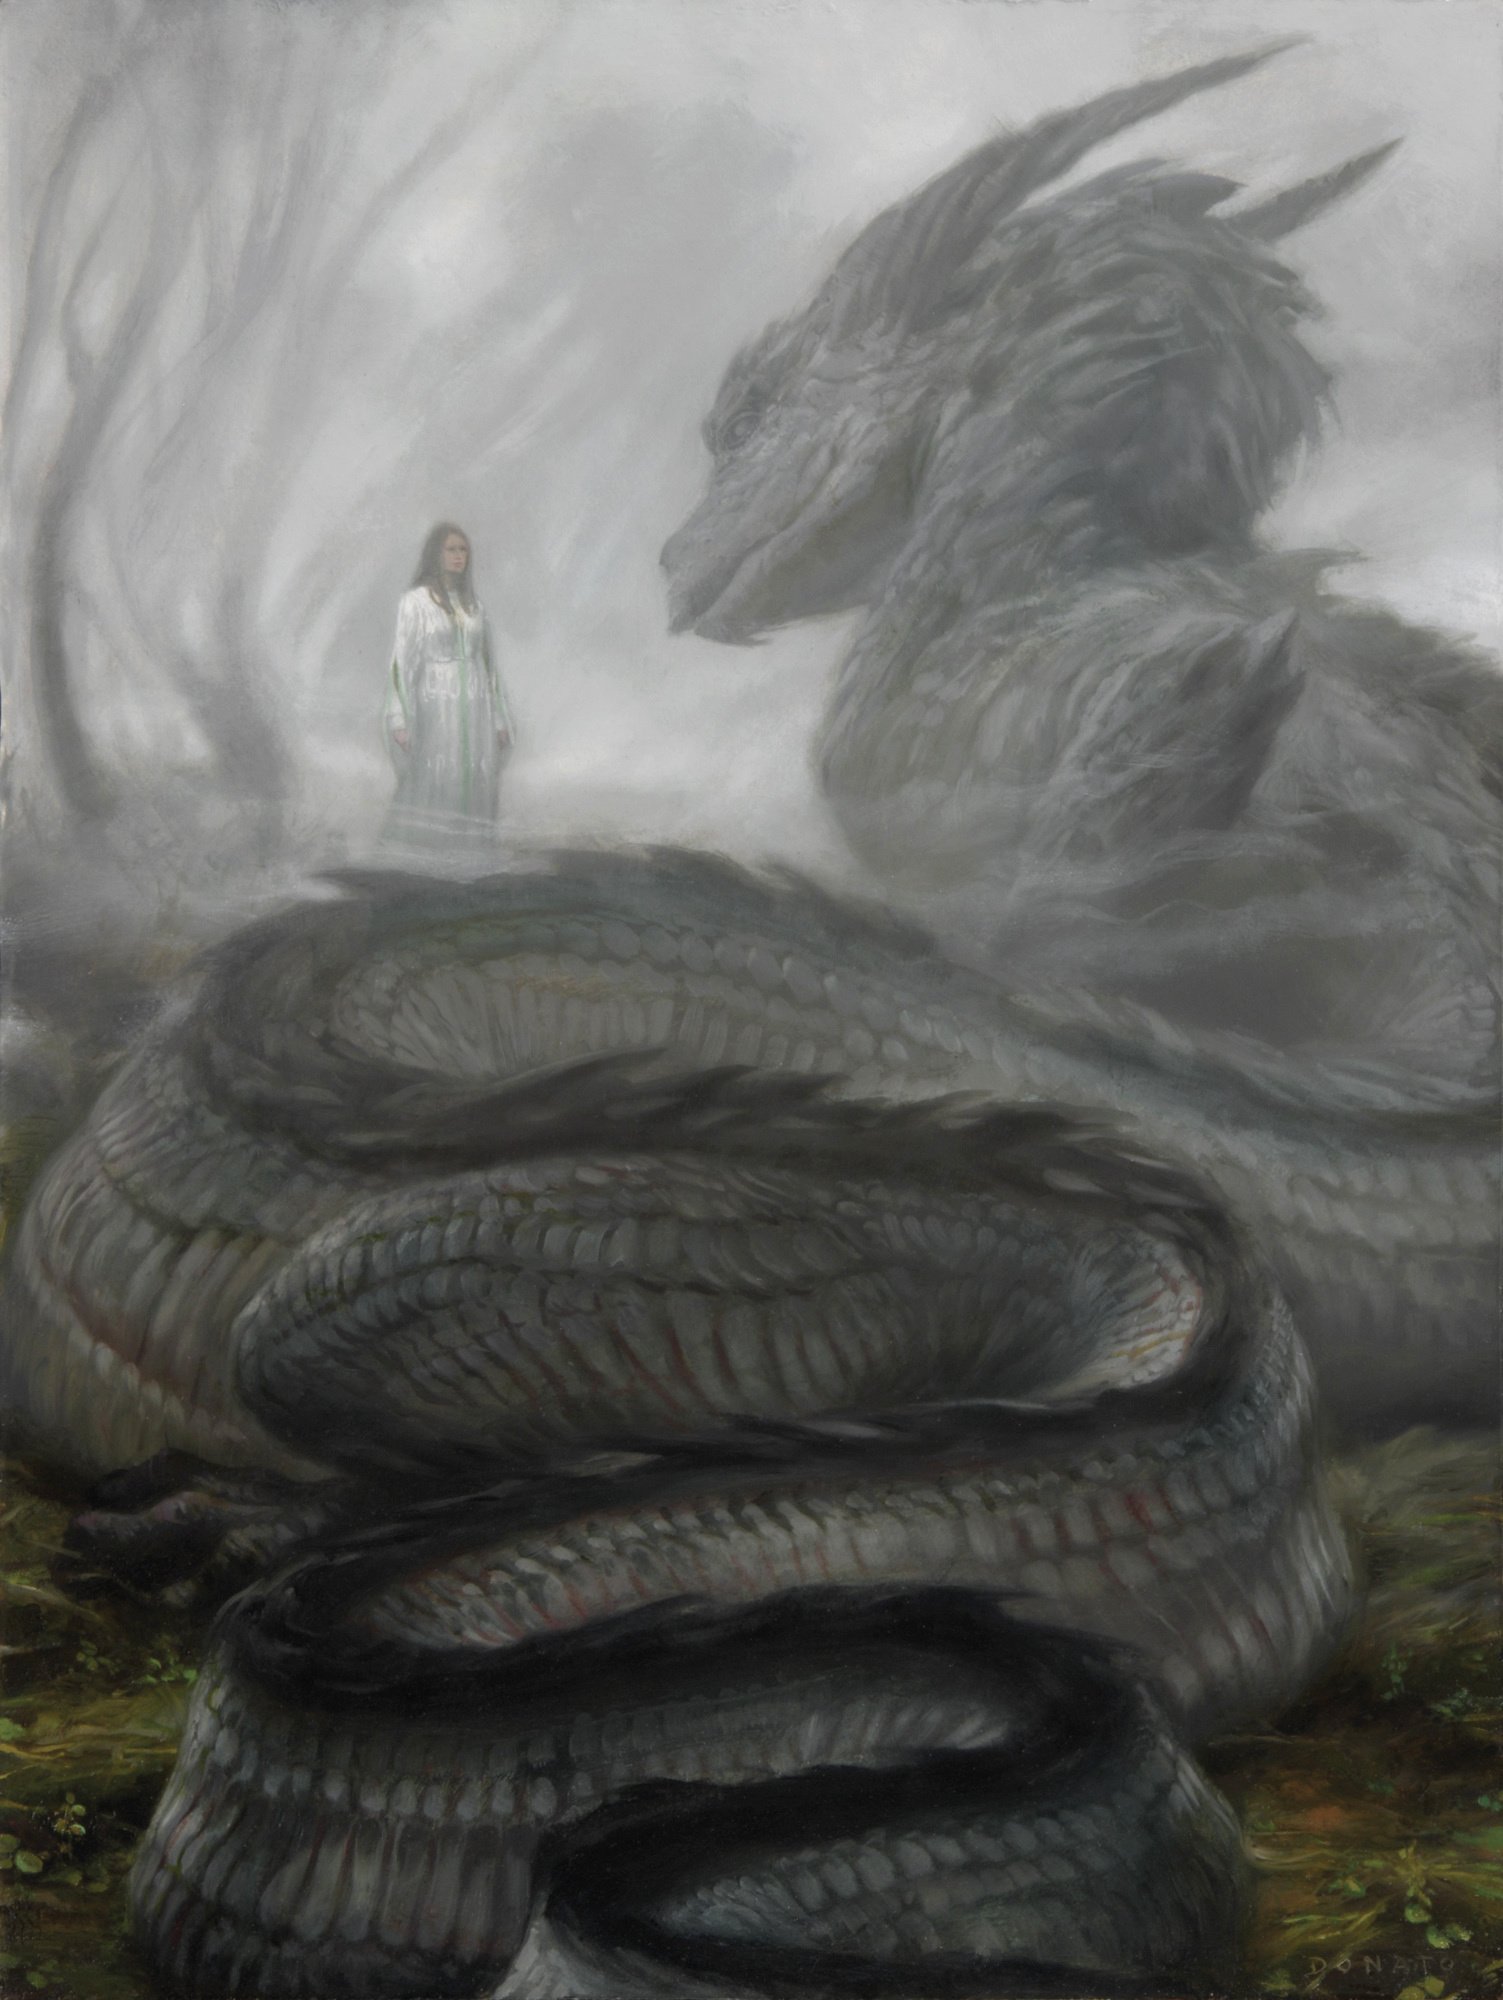 Niënor and Glaurung - Forgetfulness
24" x 18"  Oil on Panel  2012
from J.R.R. Tolkien's The Silmarillion
private collection